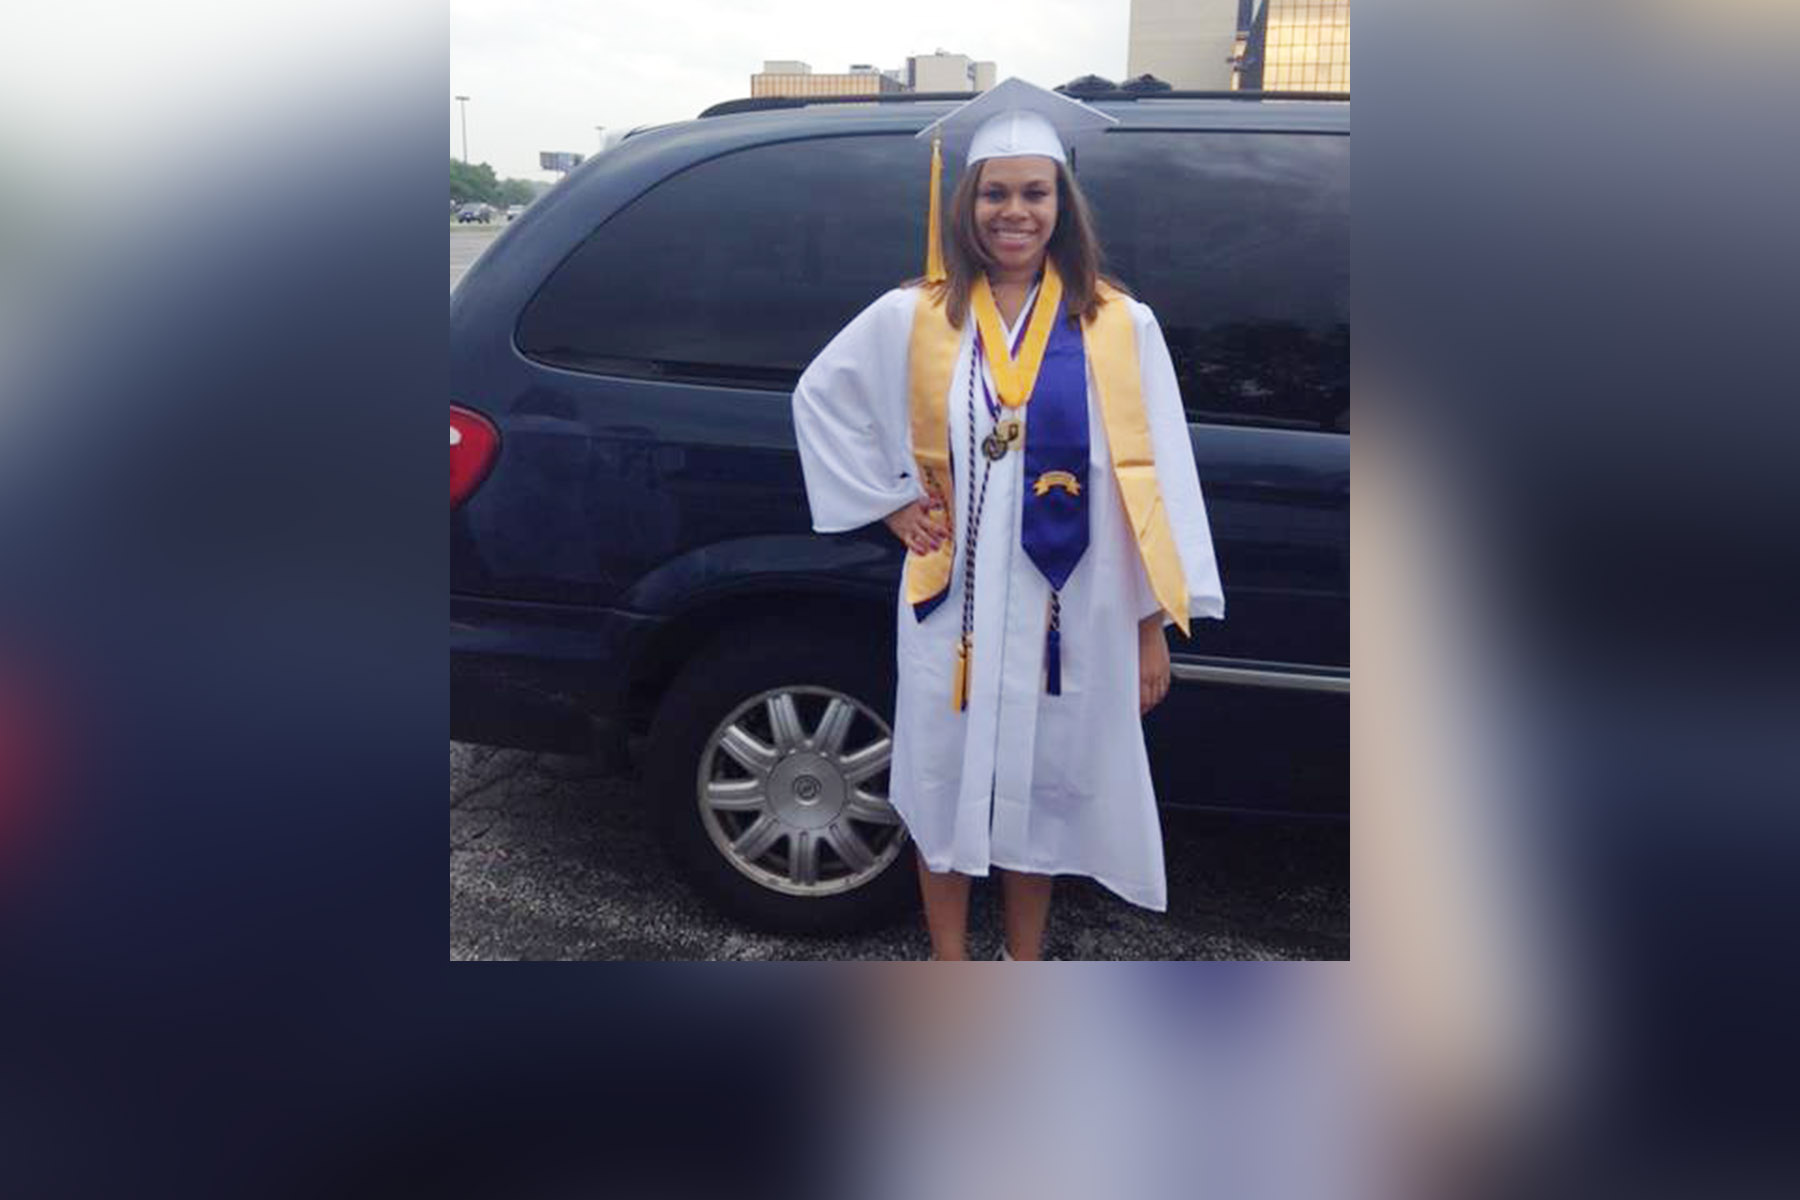 PHOTO: Nikki Smith poses for a photo on the day of her high school graduation.